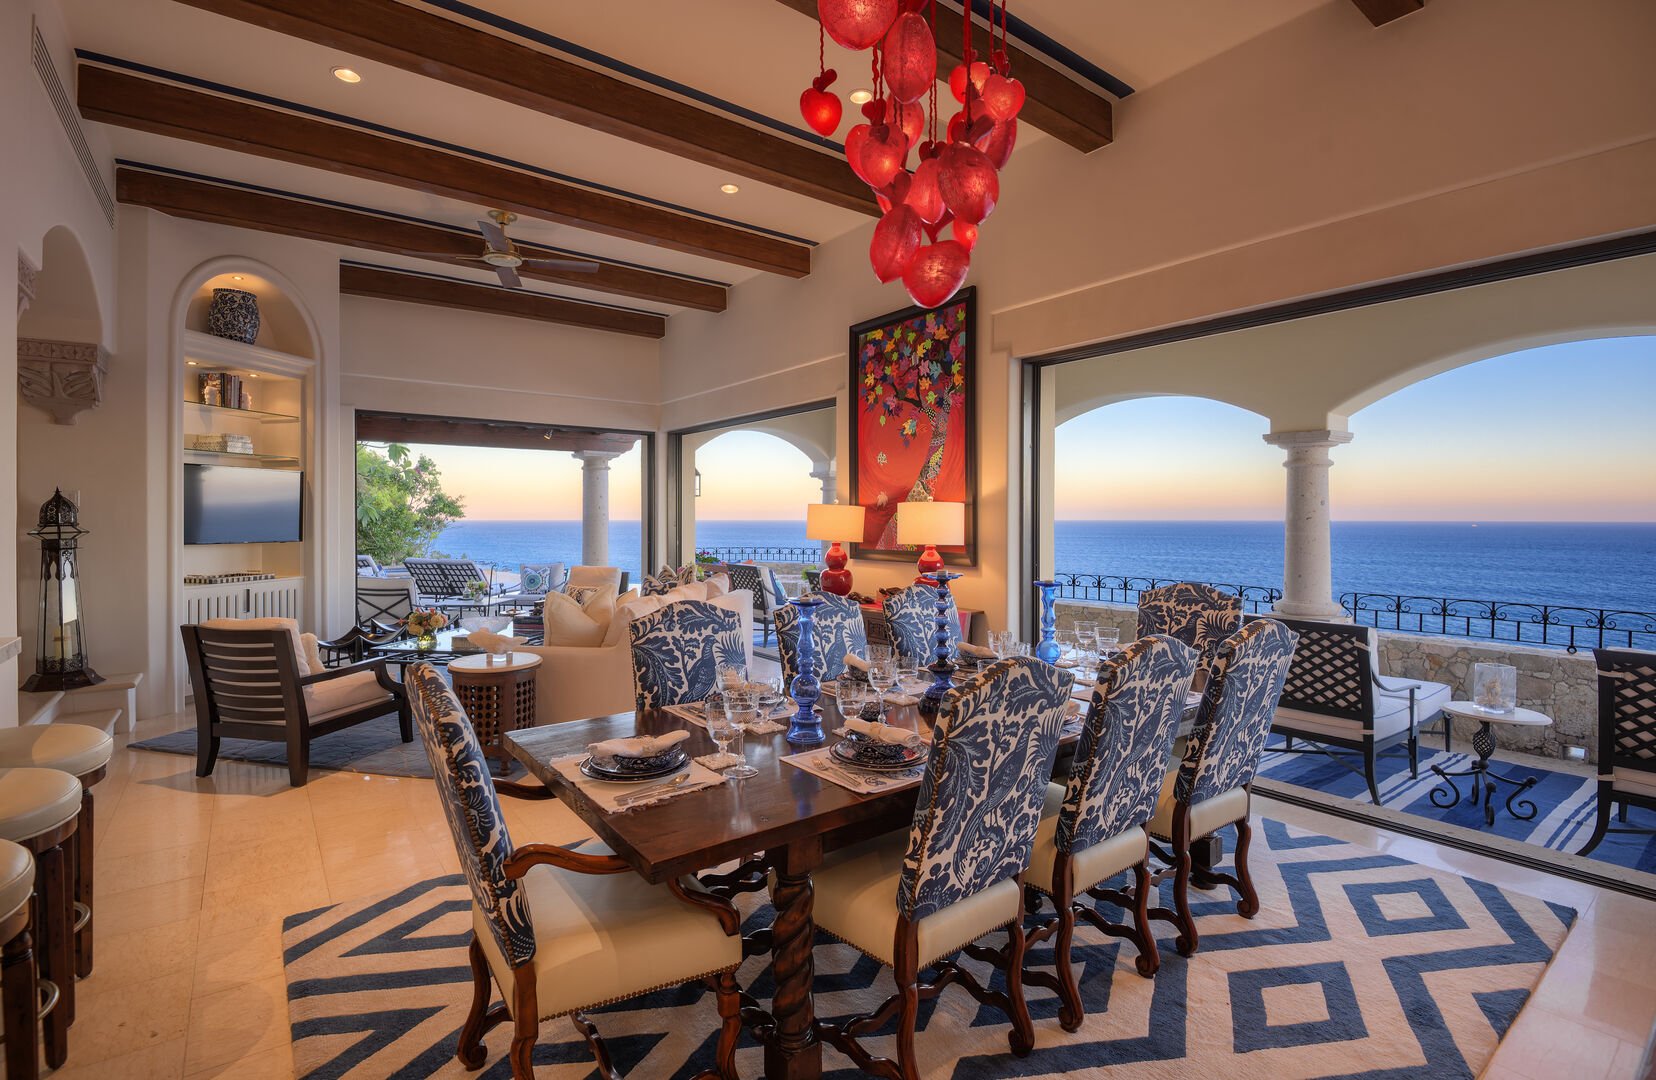 Dining and sitting area inside this villa in Los Cabos